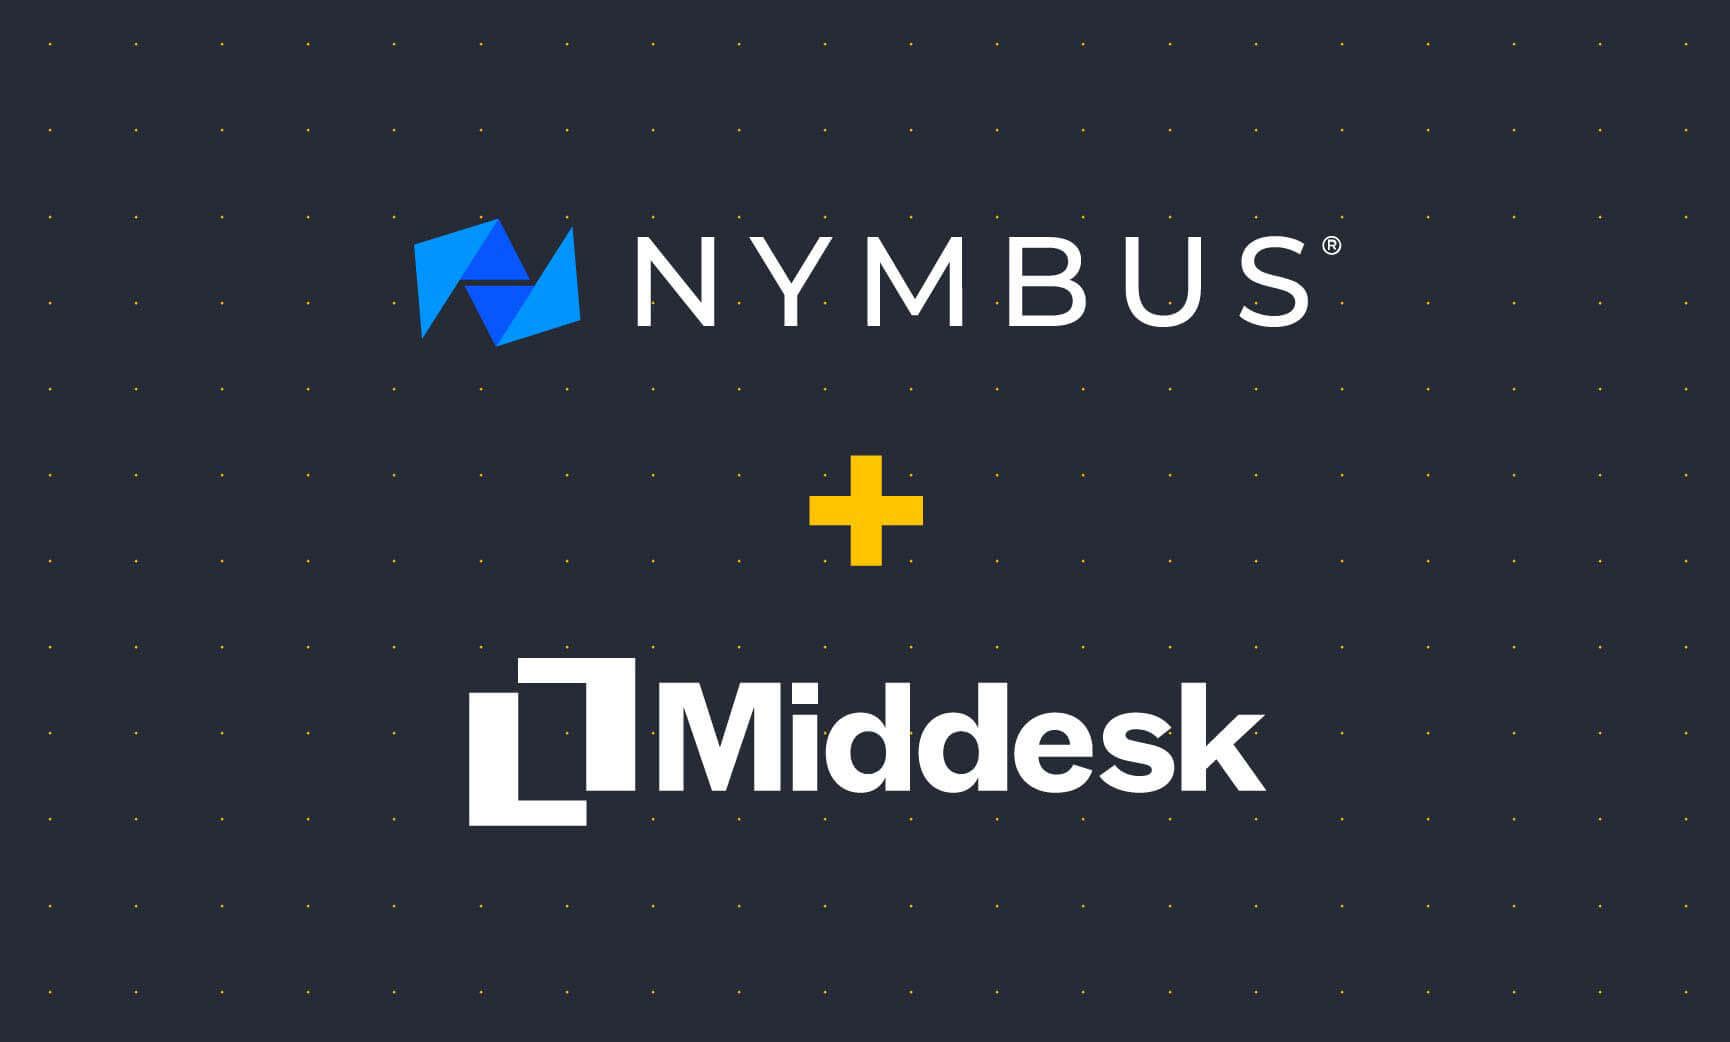 NYMBUS Partners With Middesk to Accelerate Digital Onboarding for Financial Institutions